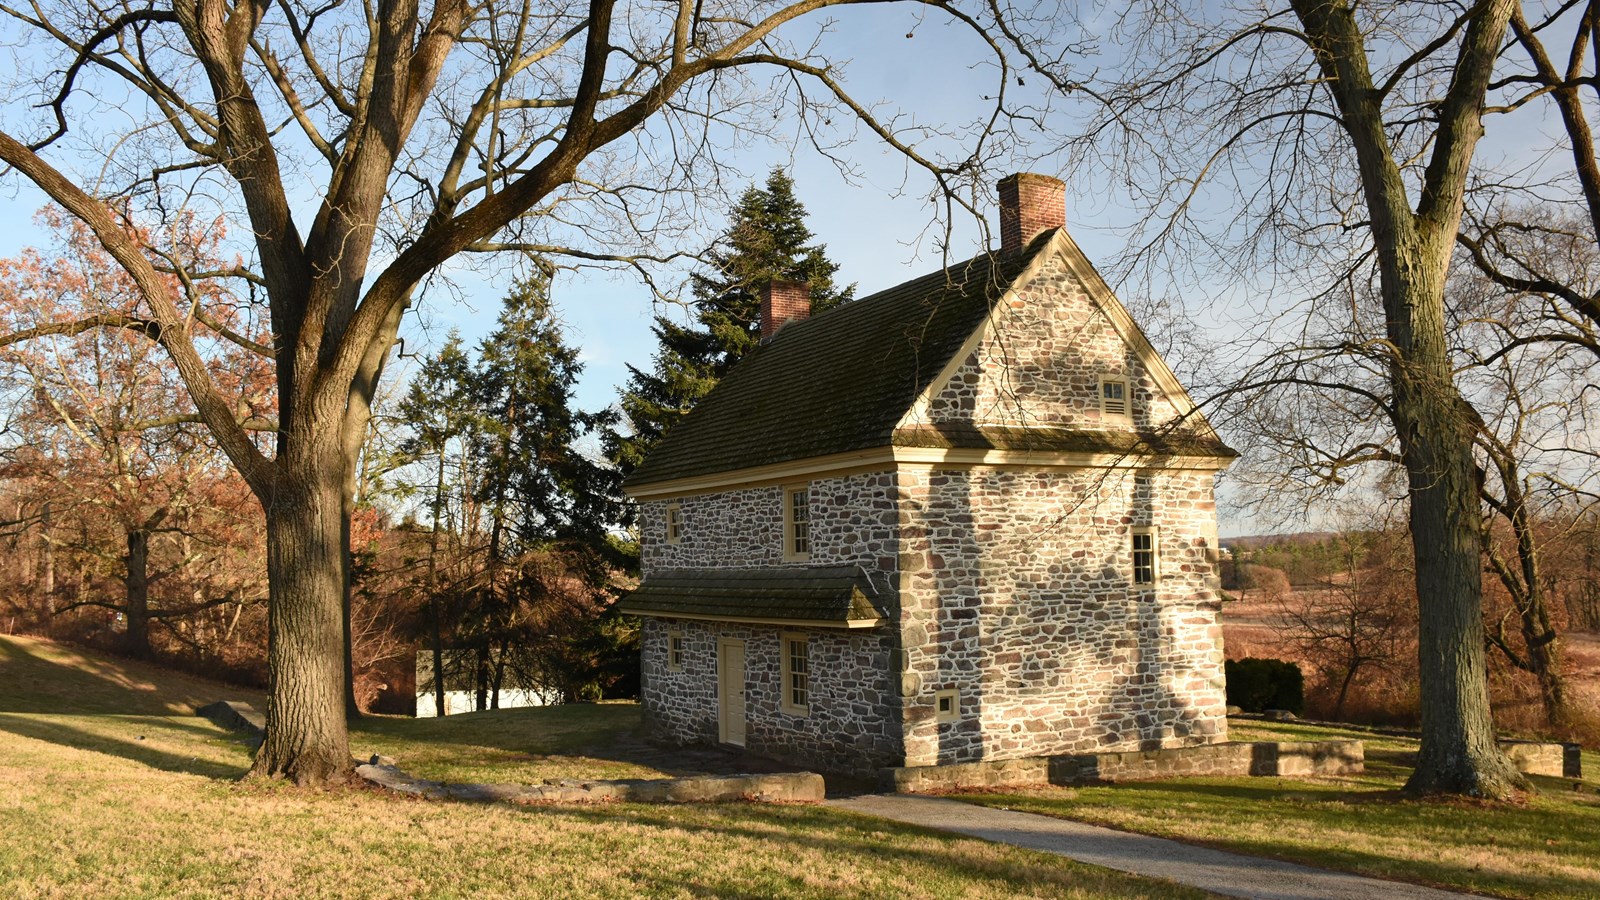 photograph, outdoors, two-story stone house, trees.